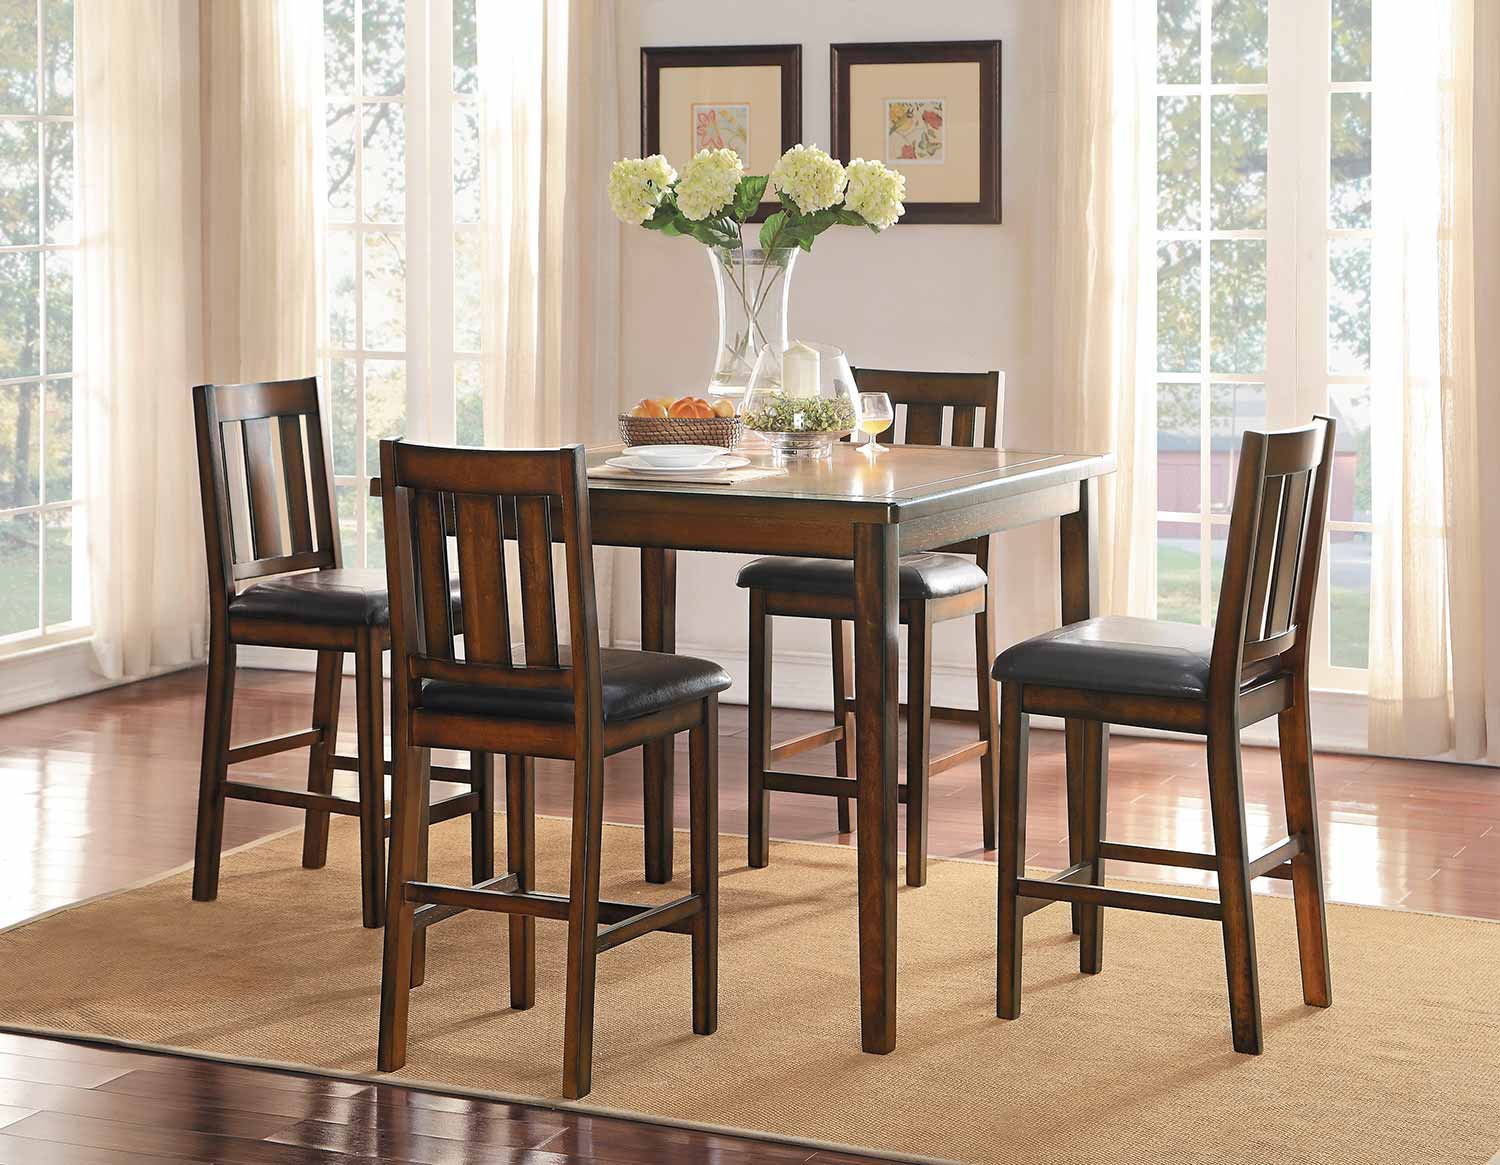 Homelegance Delmar 5- Piece Pack Counter Height Dining Set - Burnish Finish